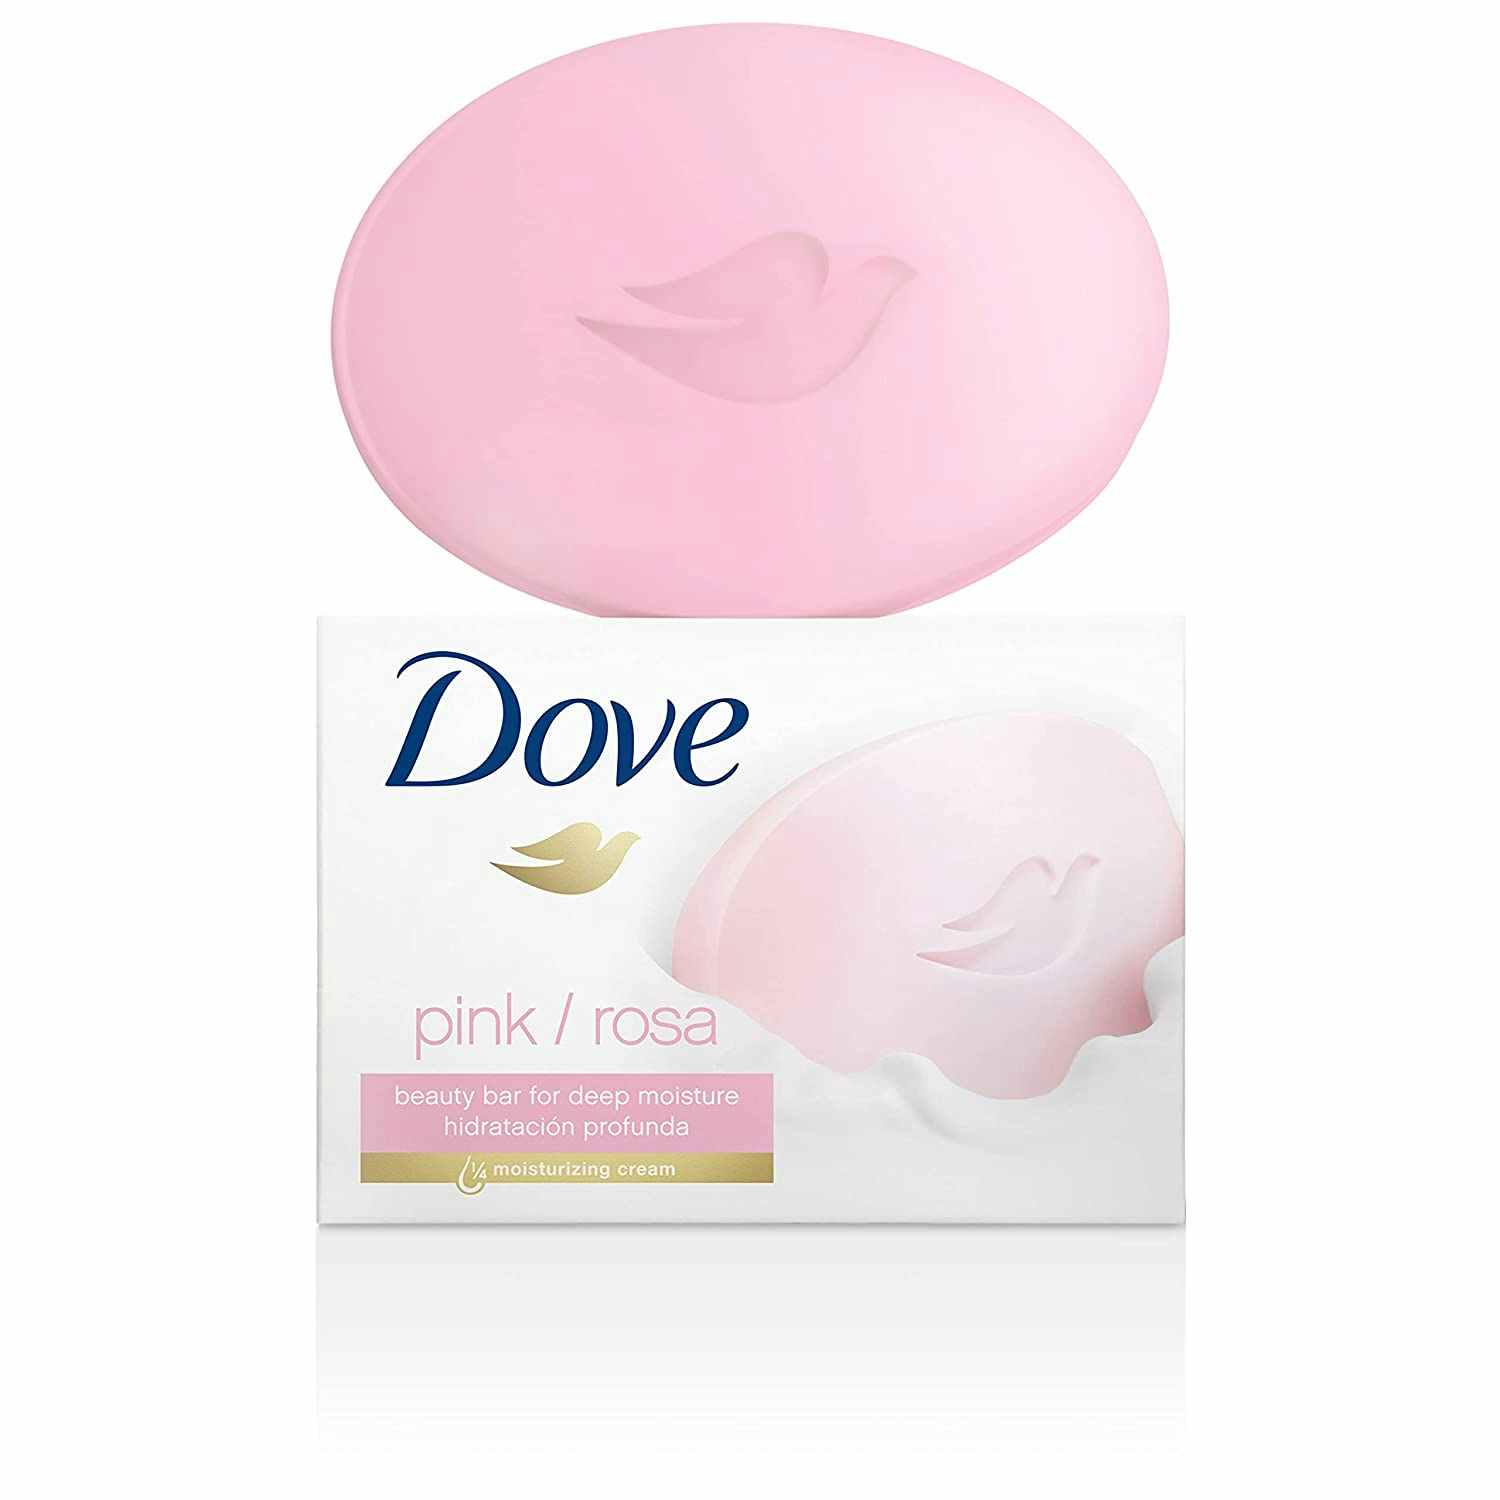 A pink Dove beauty bar out of a box.